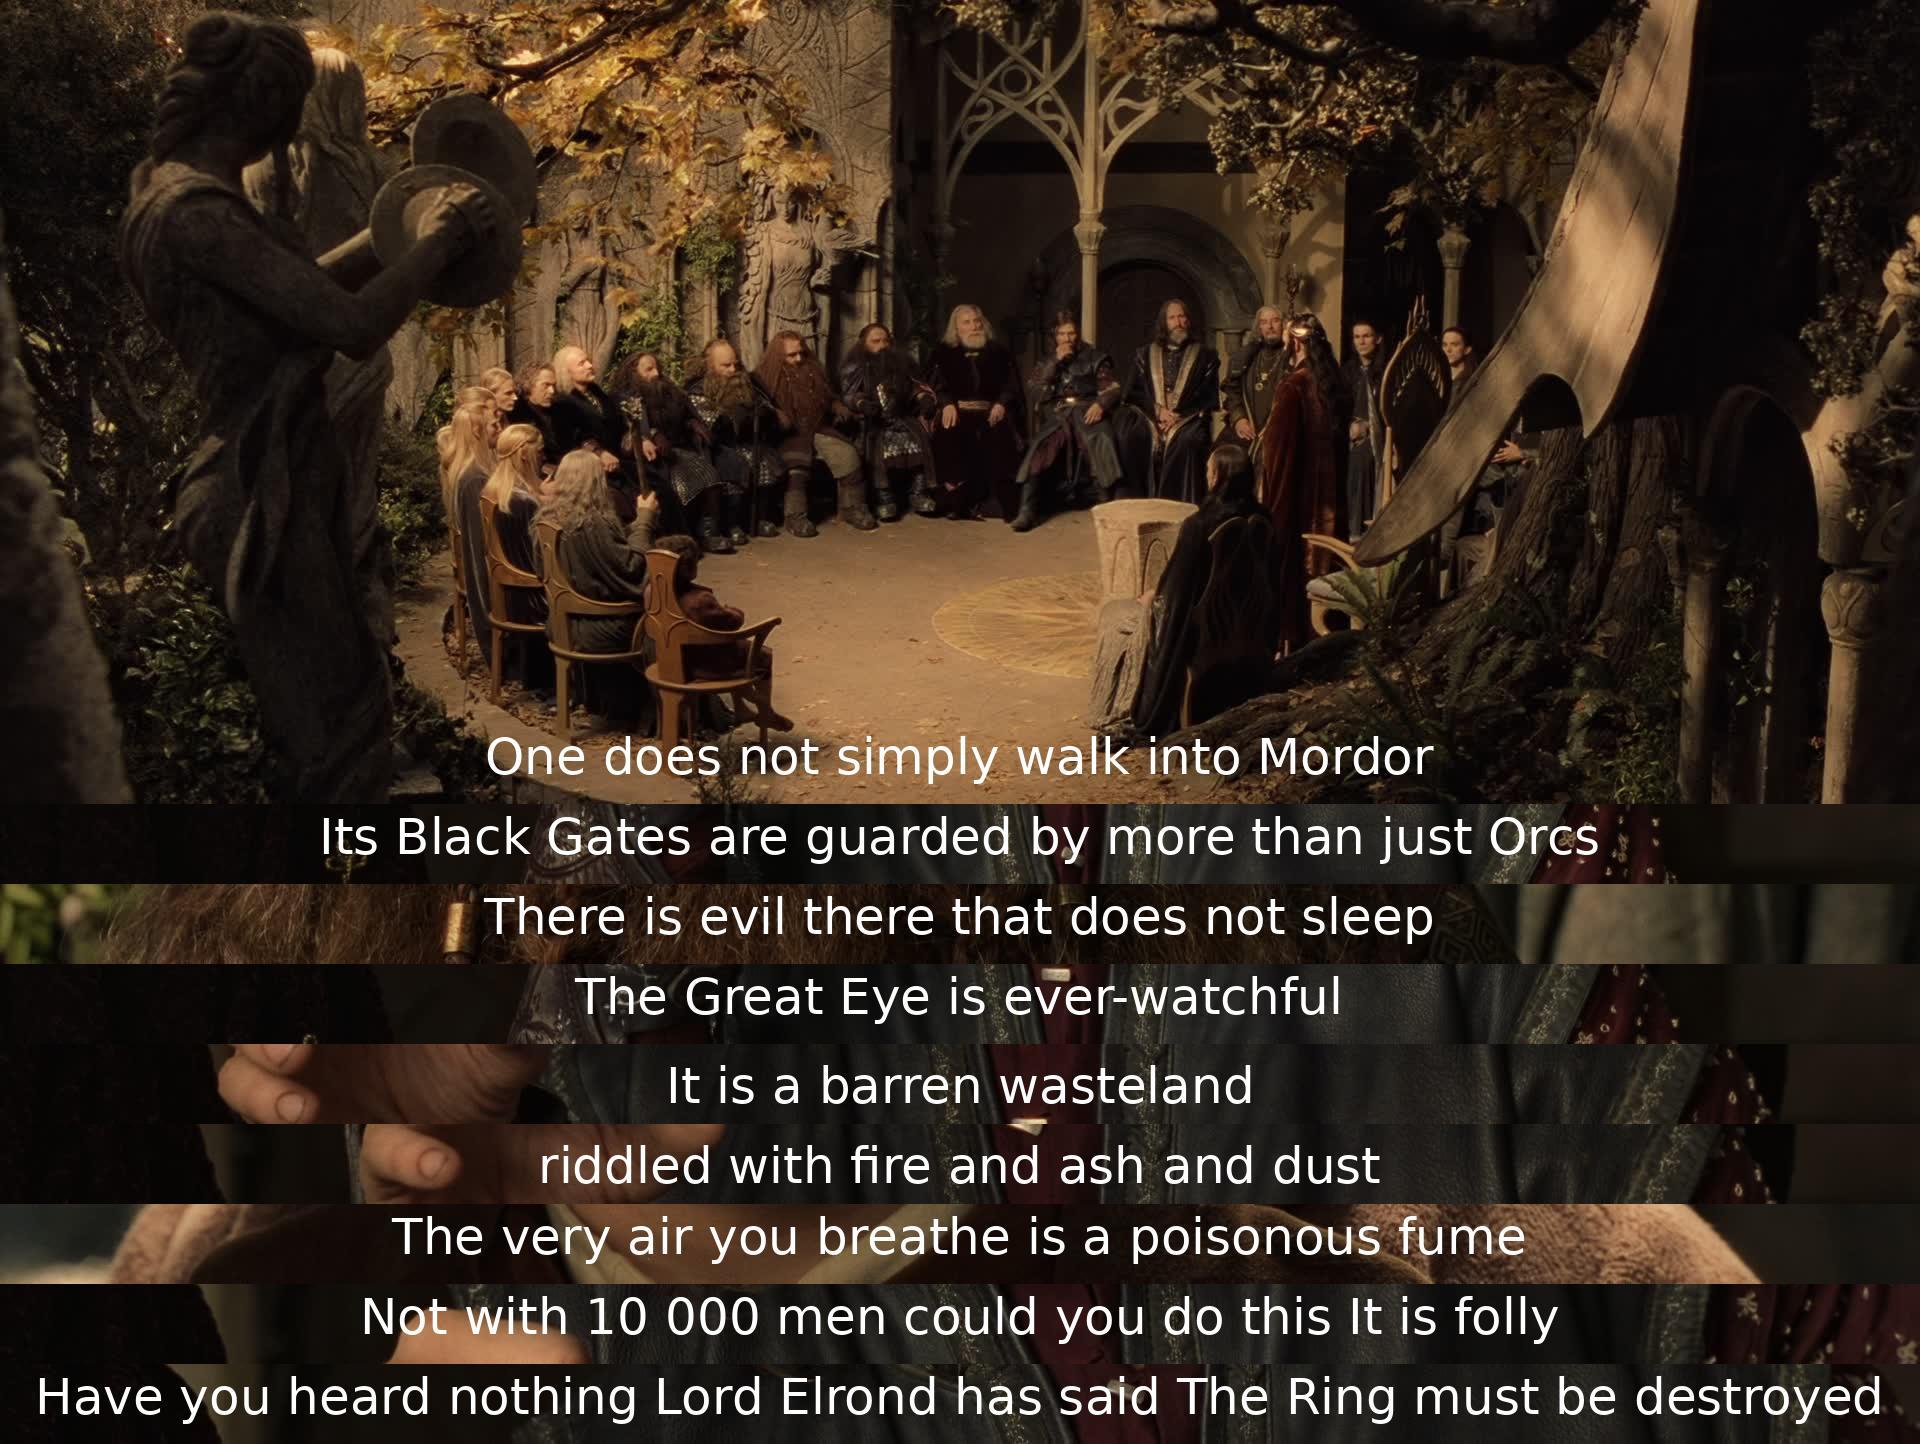 A warning is given about the treacherous journey to Mordor, highlighting its dangers and the impossibility of stealthily entering due to powerful guardians. A sense of despair and urgency is conveyed regarding the task of destroying the Ring, emphasizing the gravity of the situation and the need for decisive action.